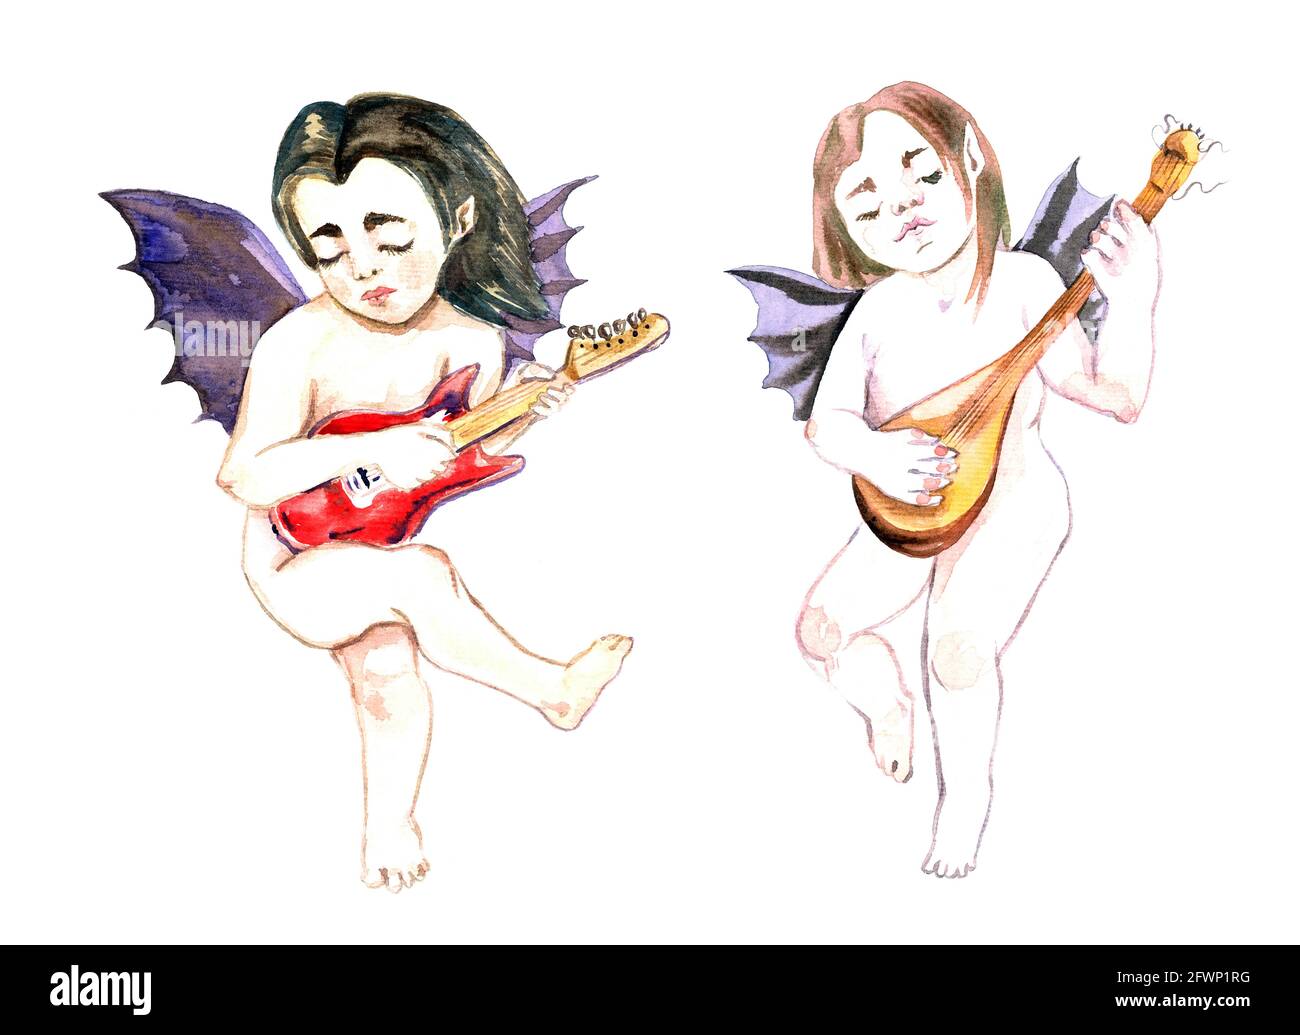 Devil angel with red electric guitar  and other playing on mandolin,  isolated on white hand painted watercolor illustration Stock Photo